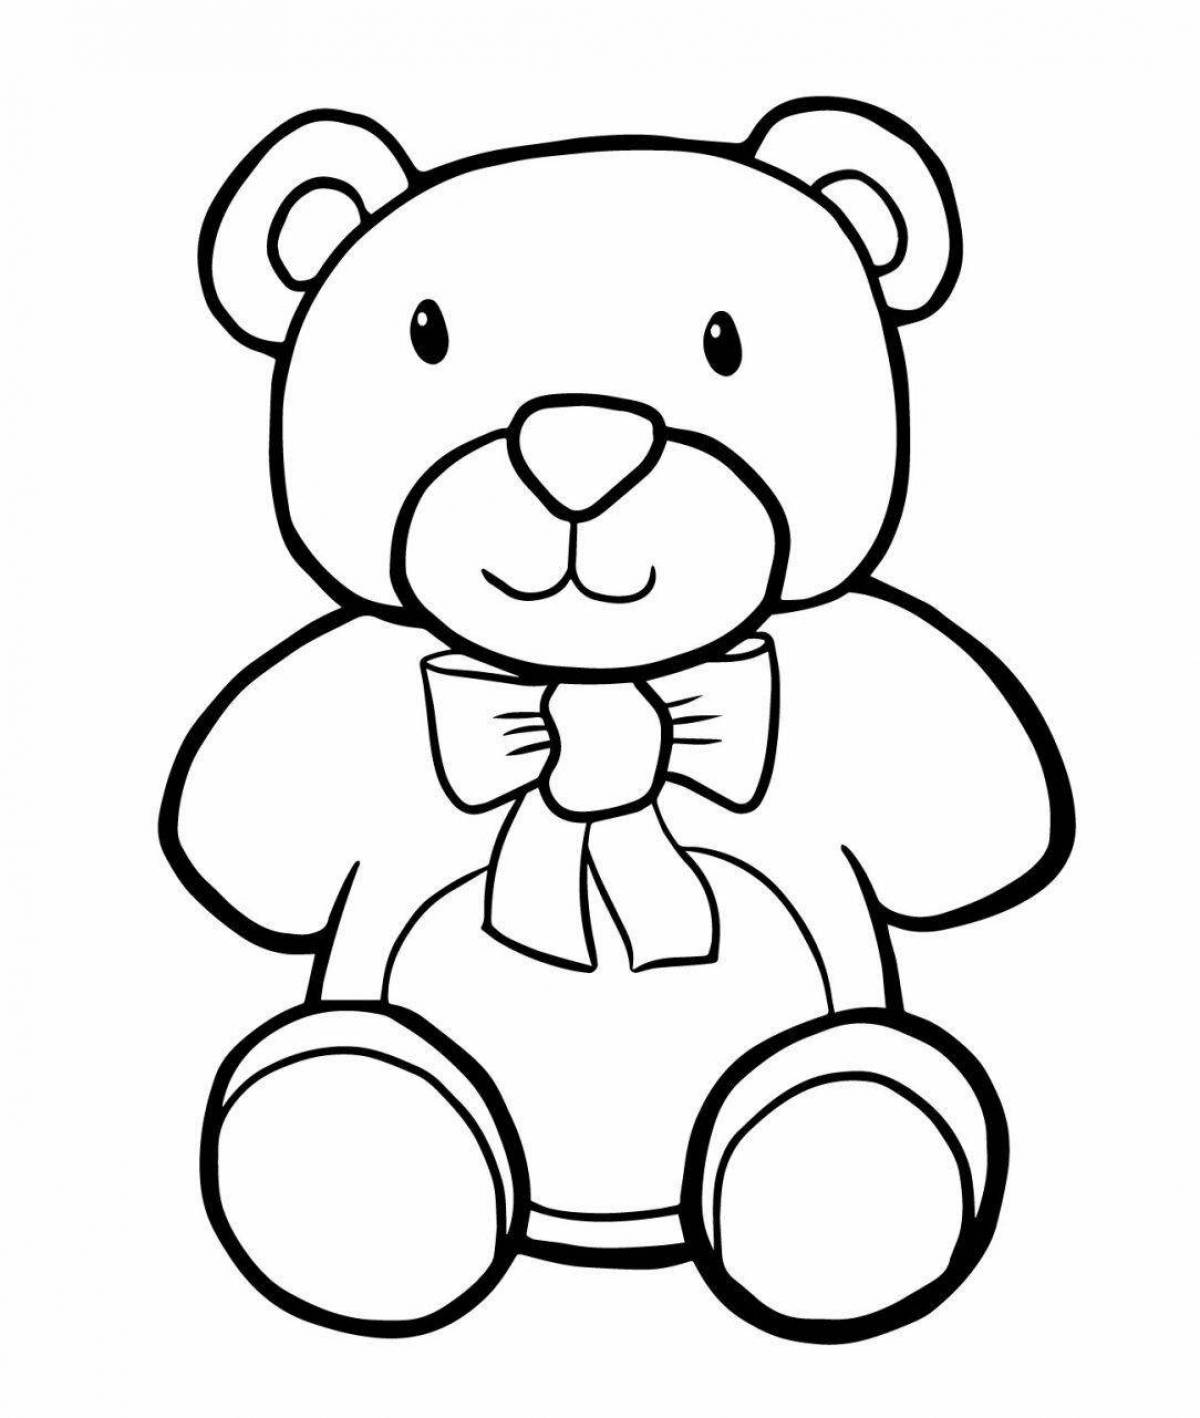 Adorable teddy bear coloring book for children 6-7 years old